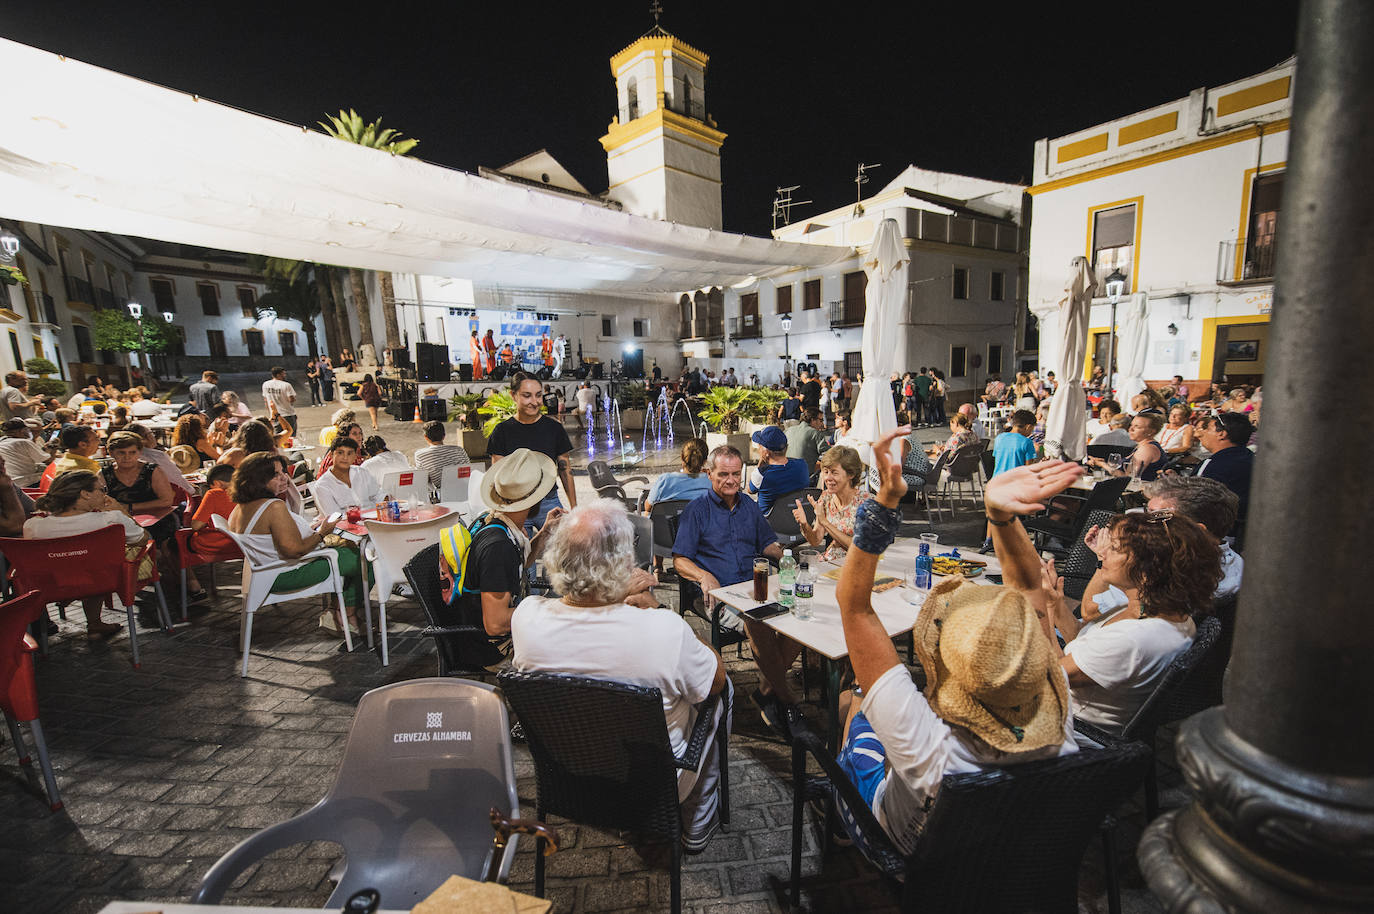 More than 60 musicians, most of them international bands from the United States, performed in Ronda, Montejaque, Grazalema and Villaluenga del Rosario 